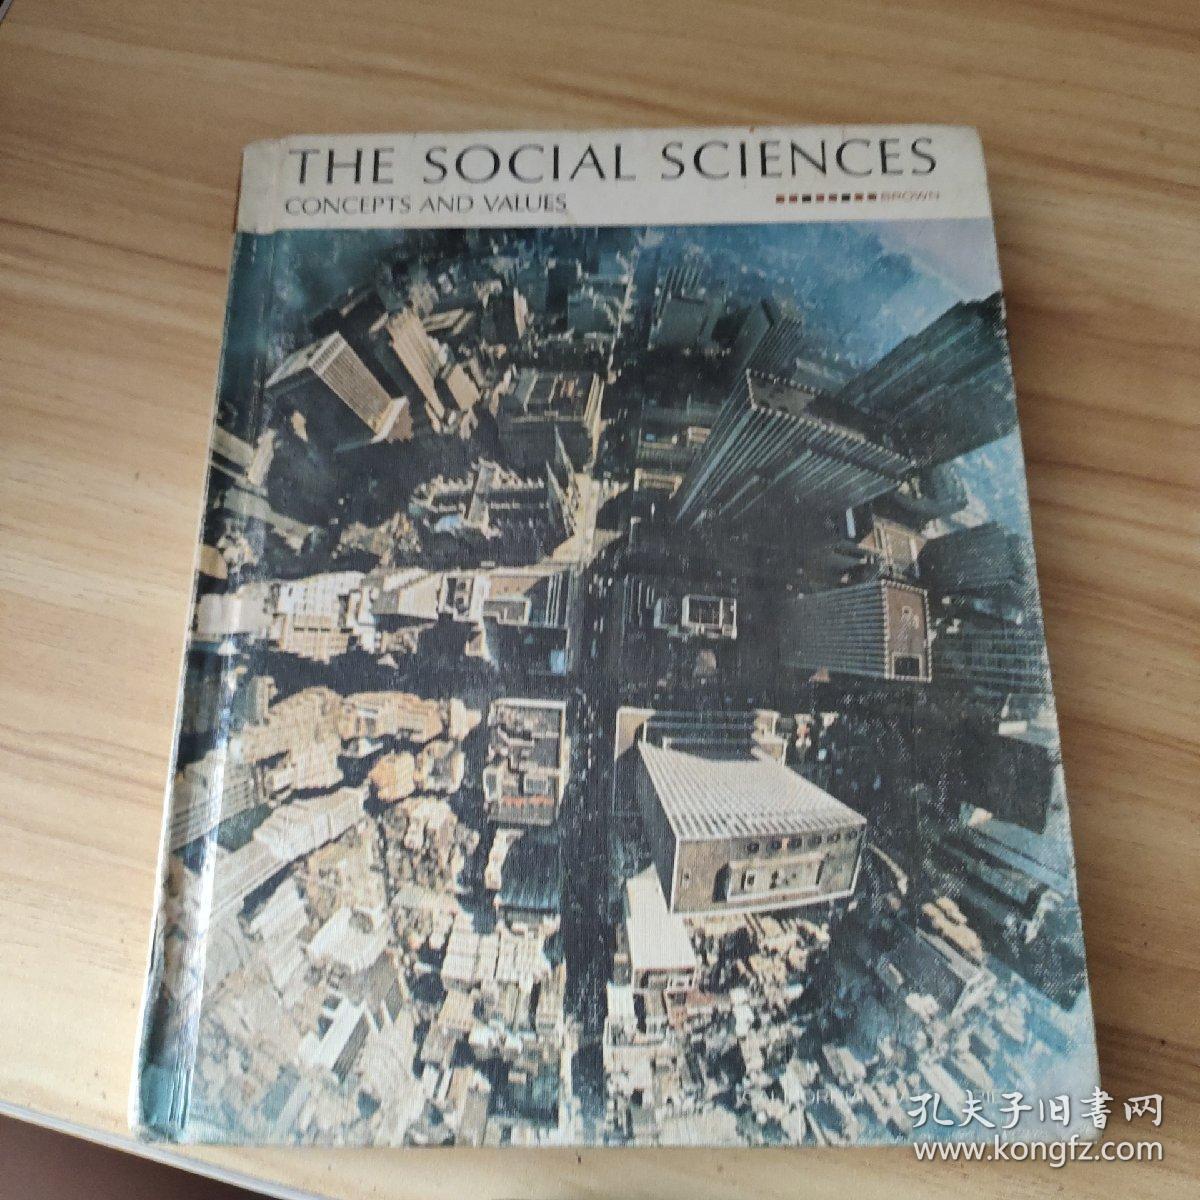 THE SOCIAL SCIENCES CONCEPTS AND VALUES